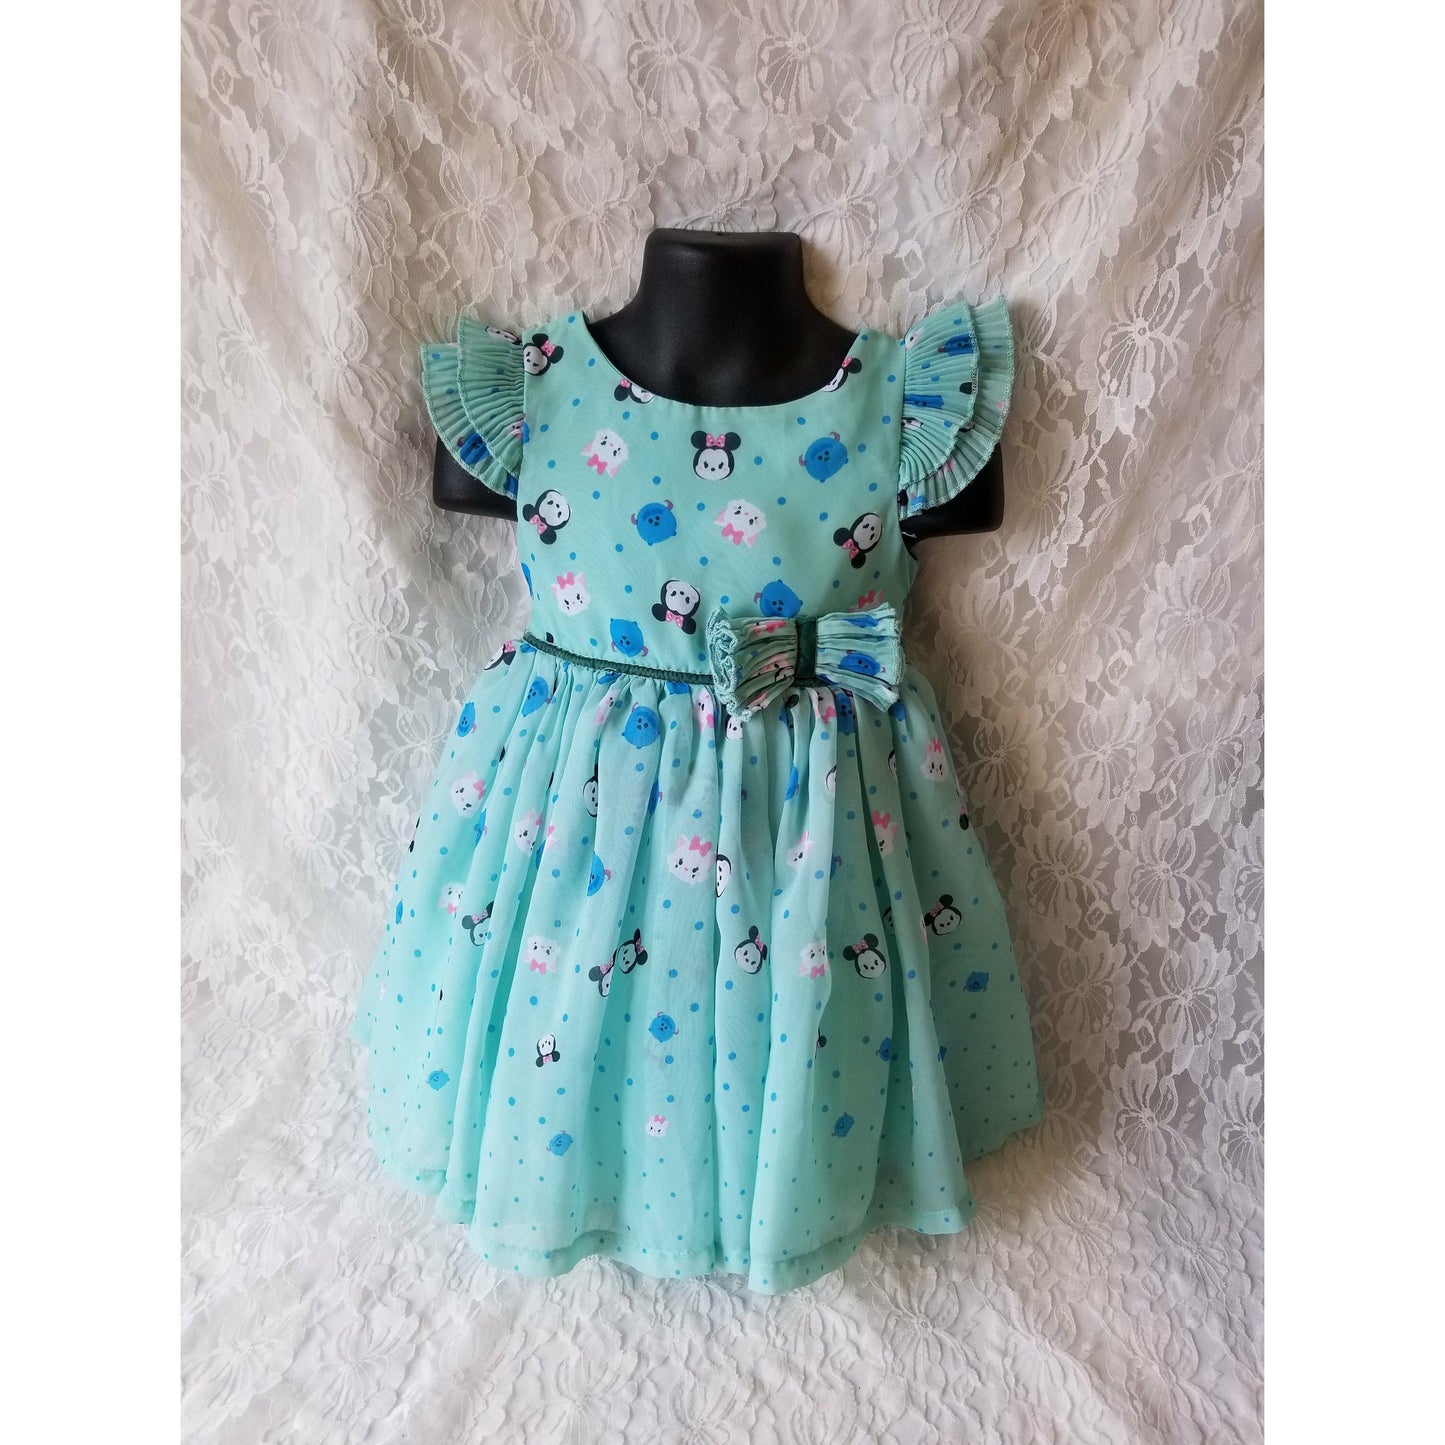 Disney Tsum Tsum Dress for Toddler Child or Large Doll ~ Size 2T ~ Chiffon Overlay ~ Cute!